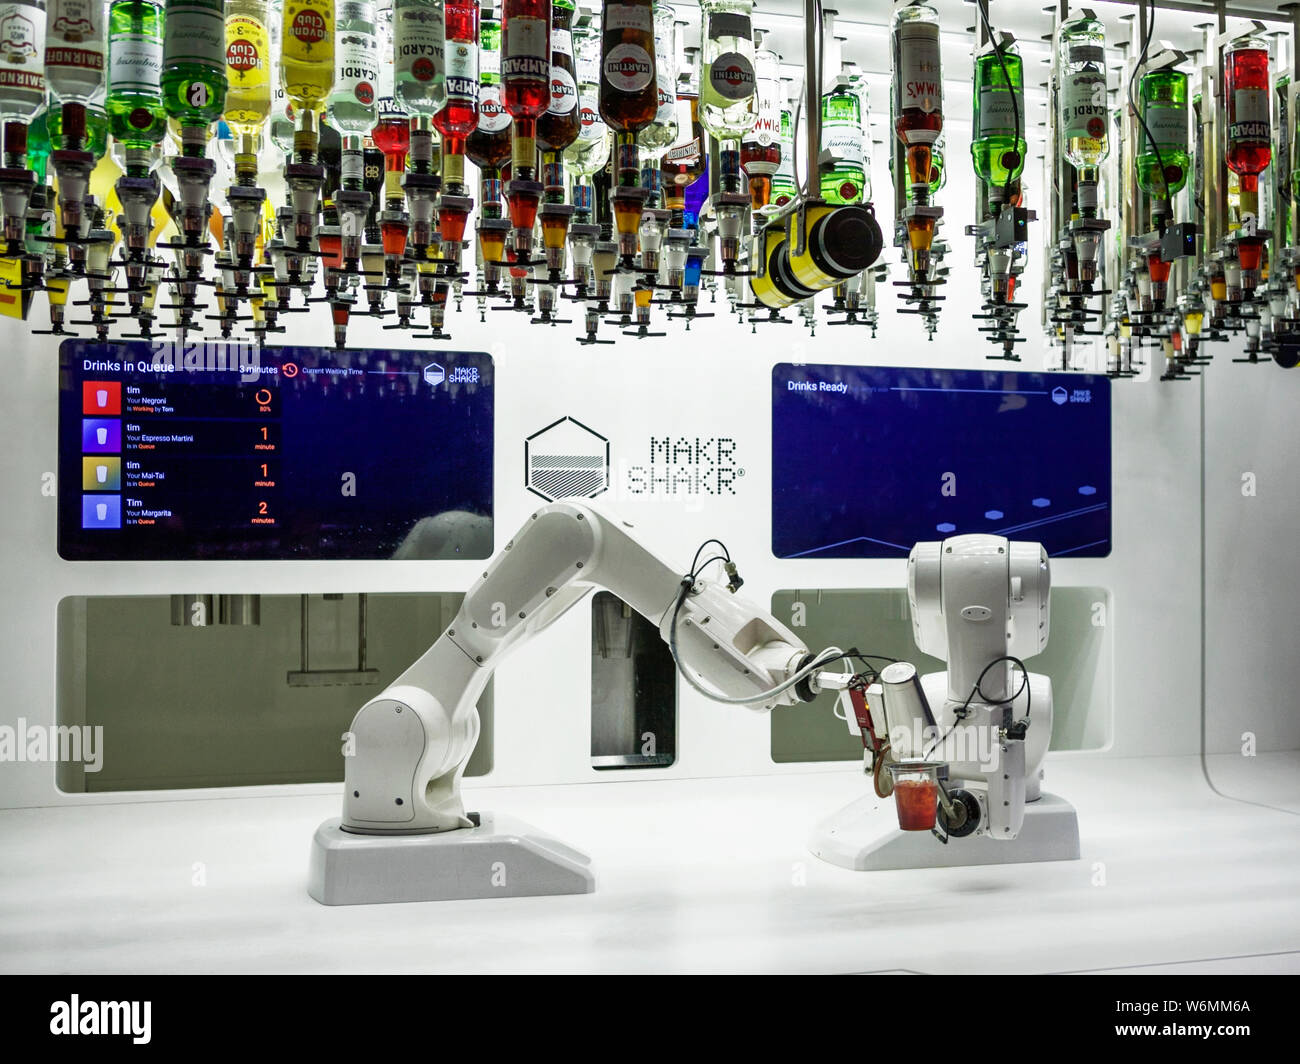 Makr shakr: 2 robotic arms make a variety of cocktails to order. AI, artificial intelligence. Exhibition at the Barbican London. Stock Photo